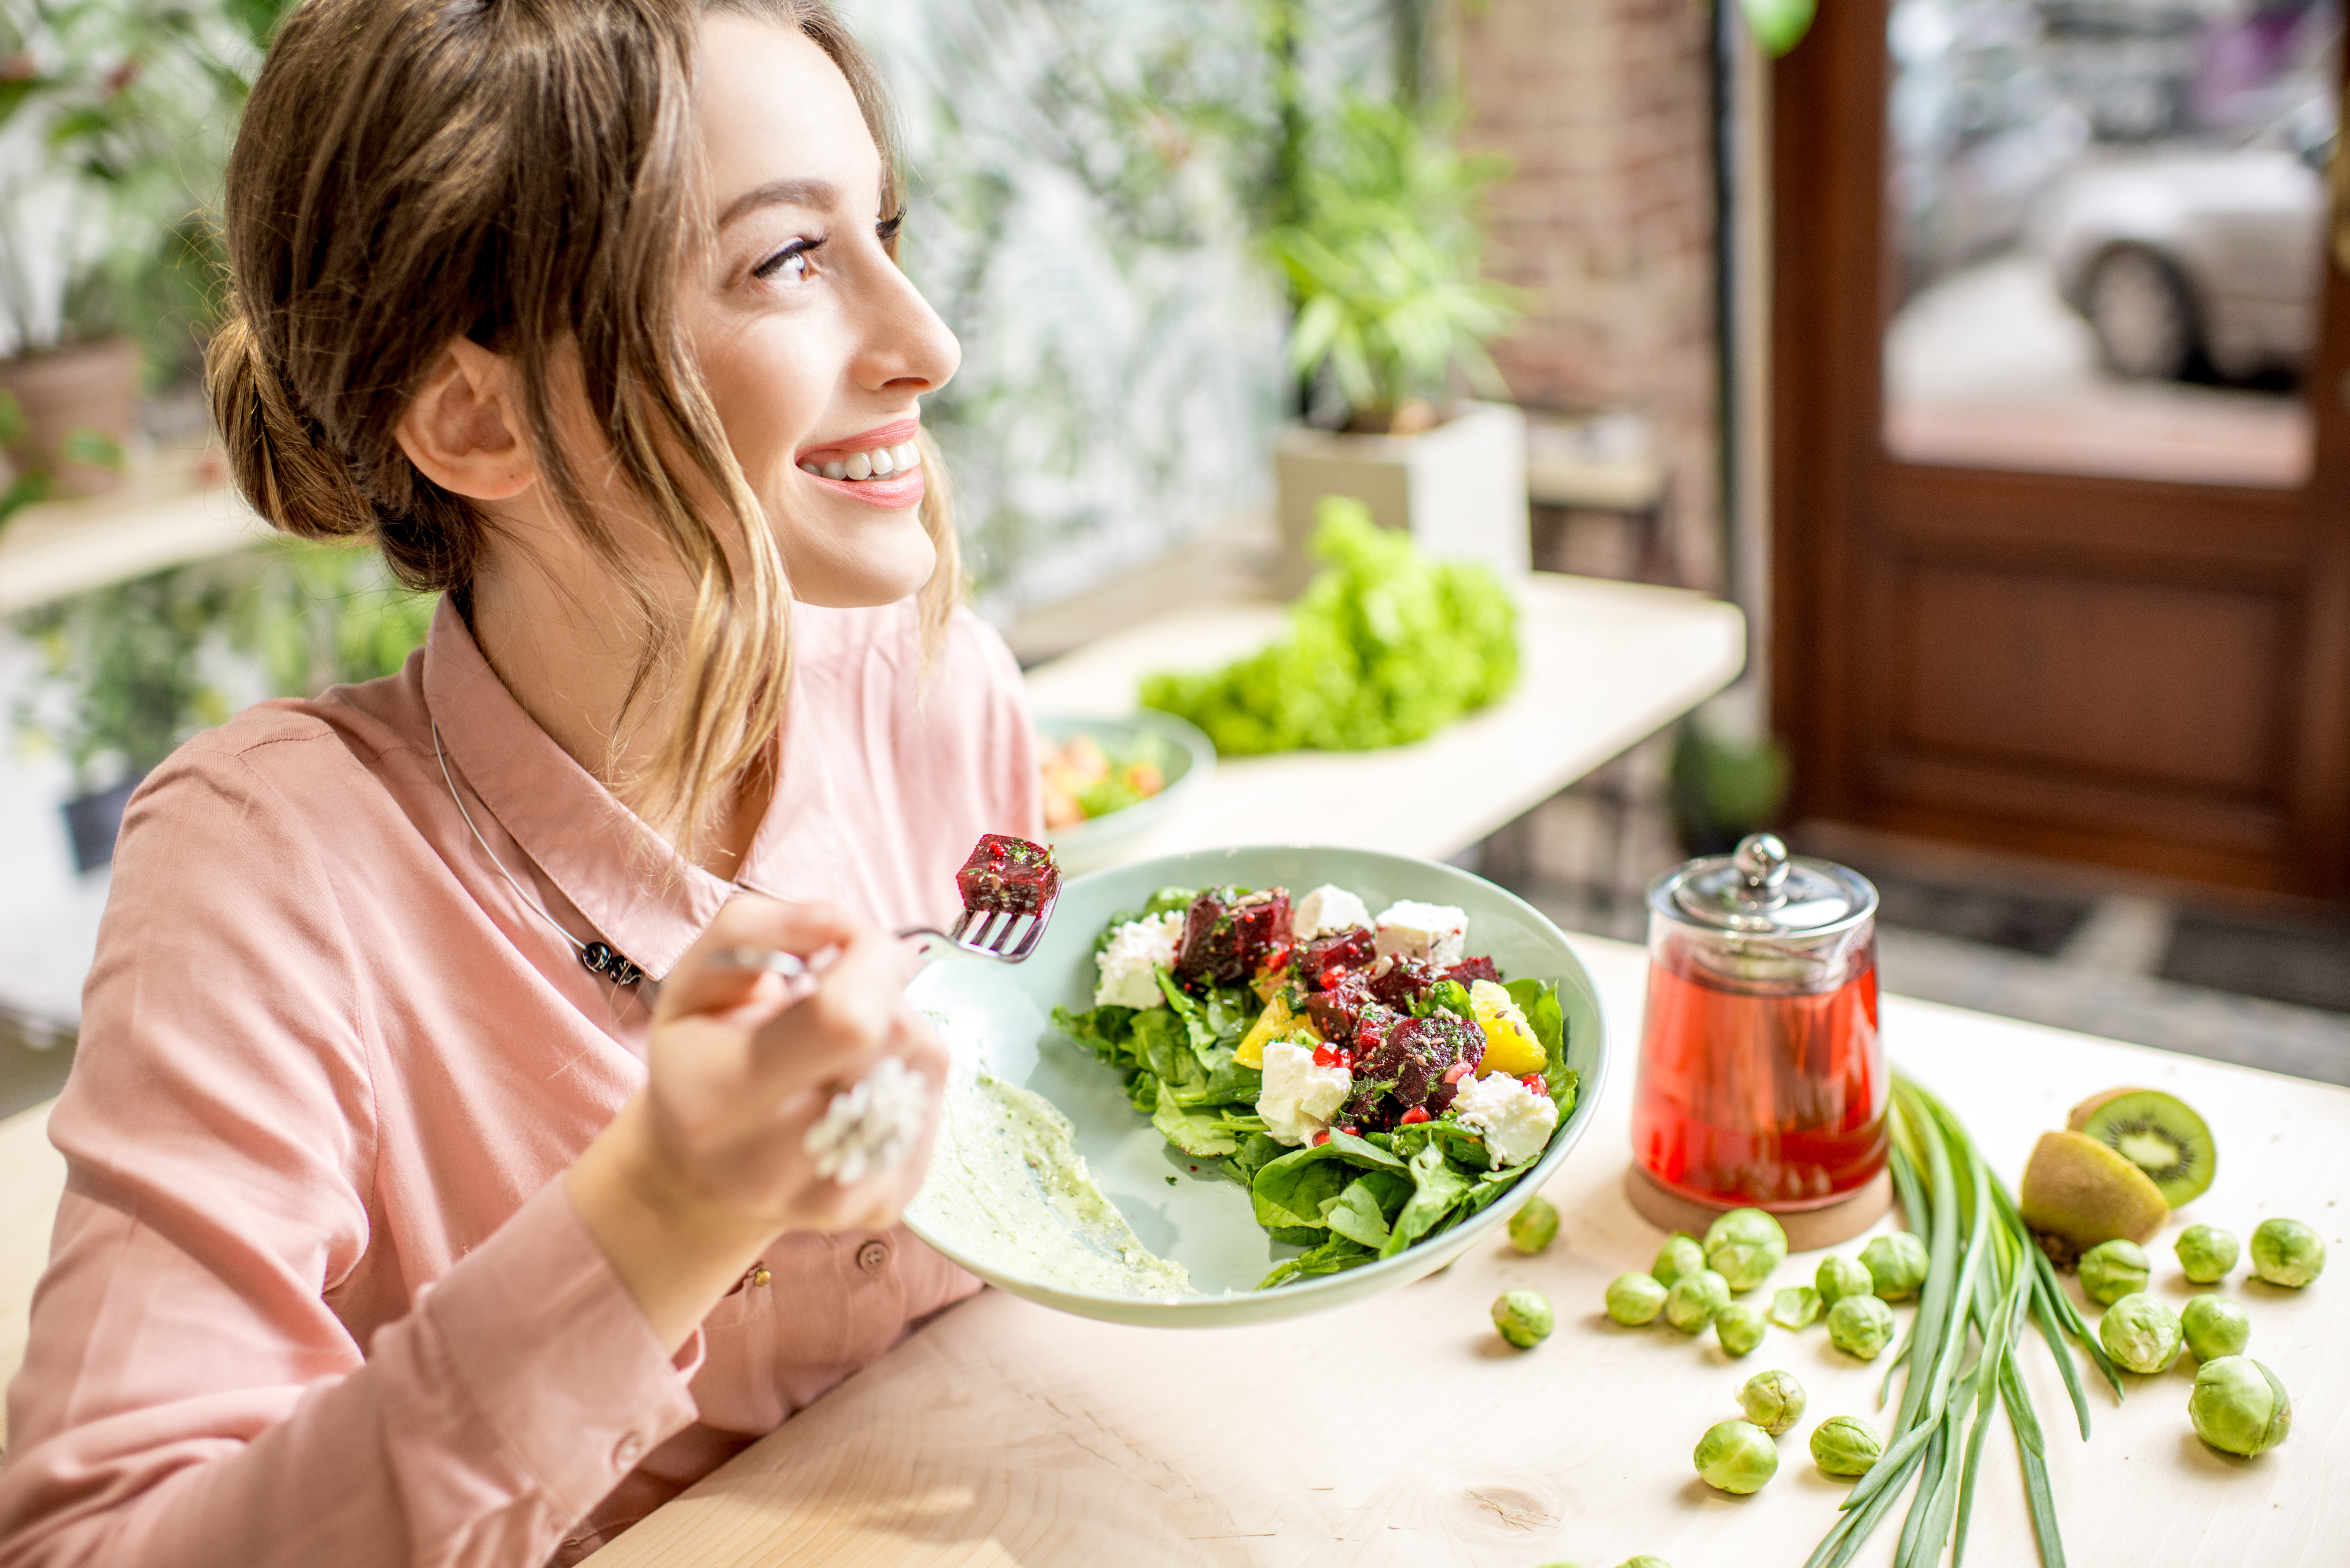 Young woman sitting at a table eating a salad